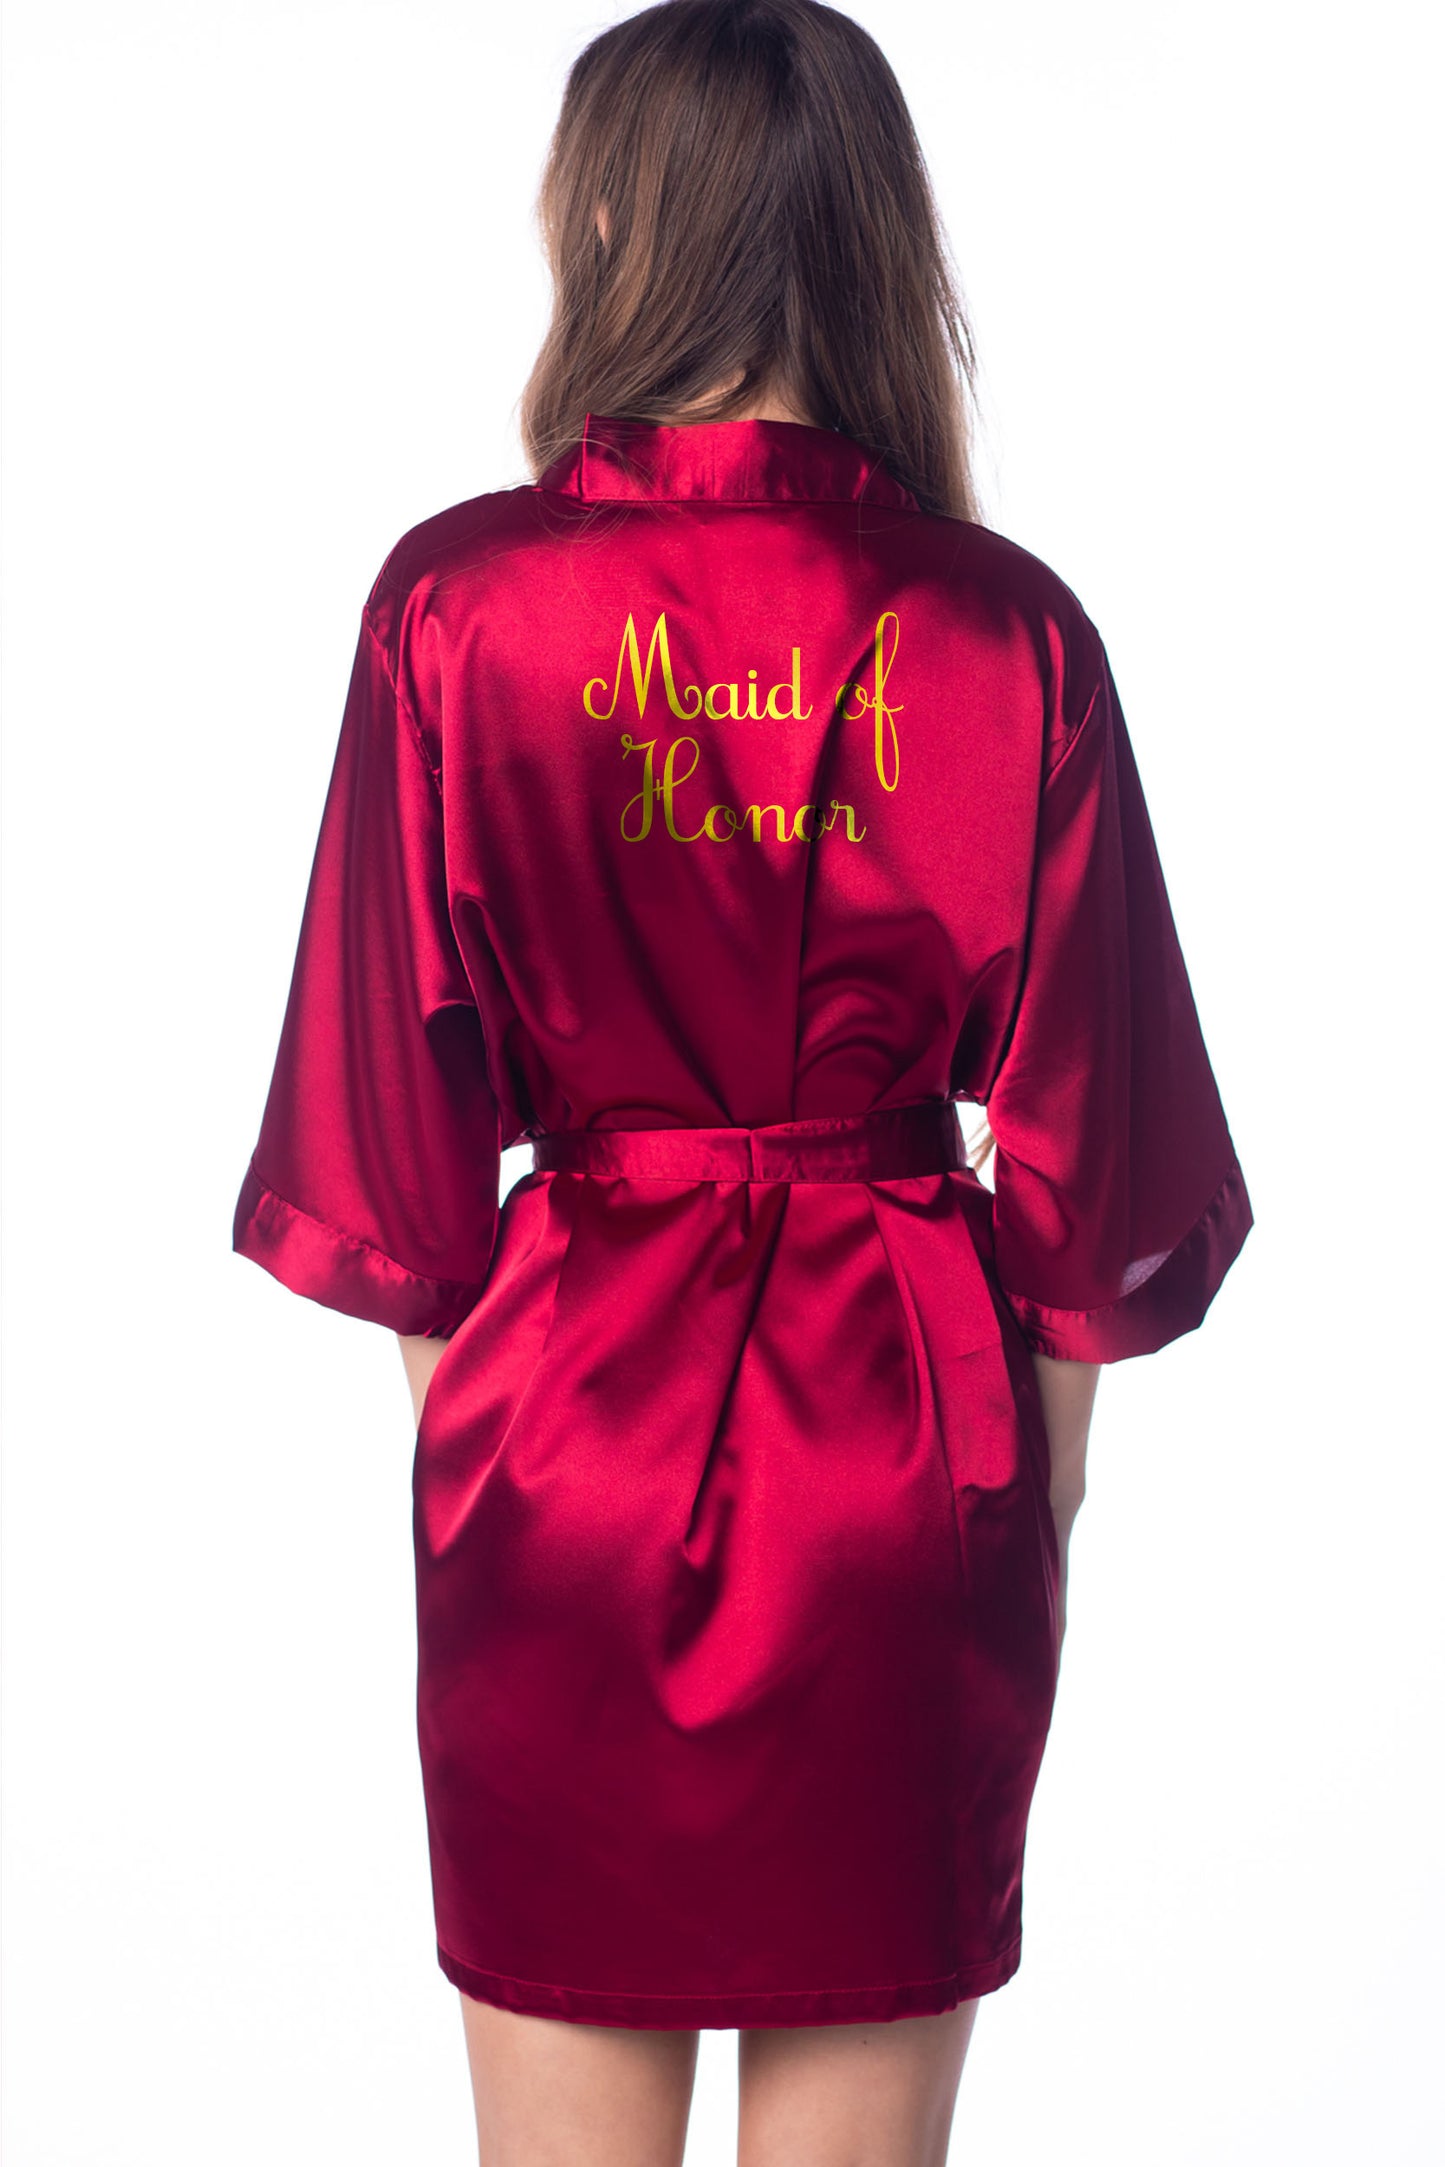 S/M "Maid of Honor" Burgundy Satin Robe - Cursif in Metal Gold (Clearance Item)